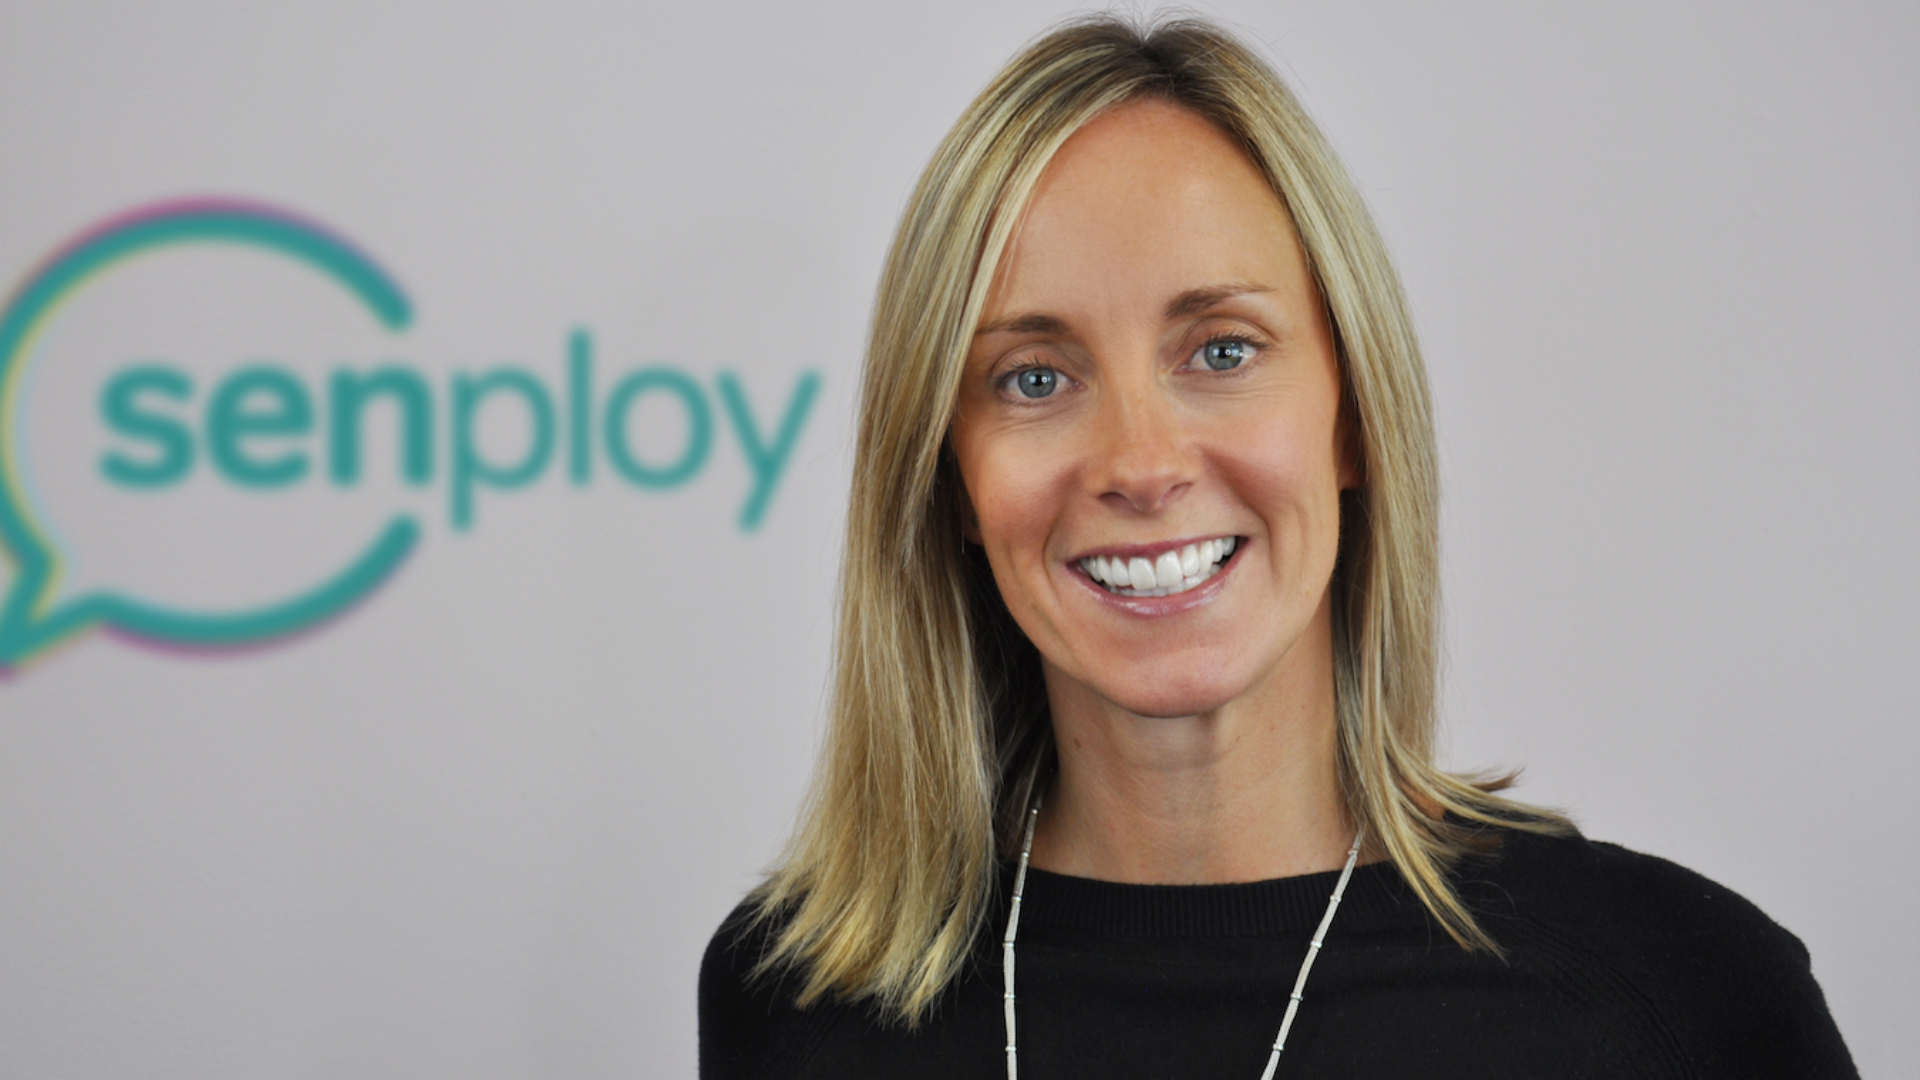 Amy Allen, Founder & MD at Senploy